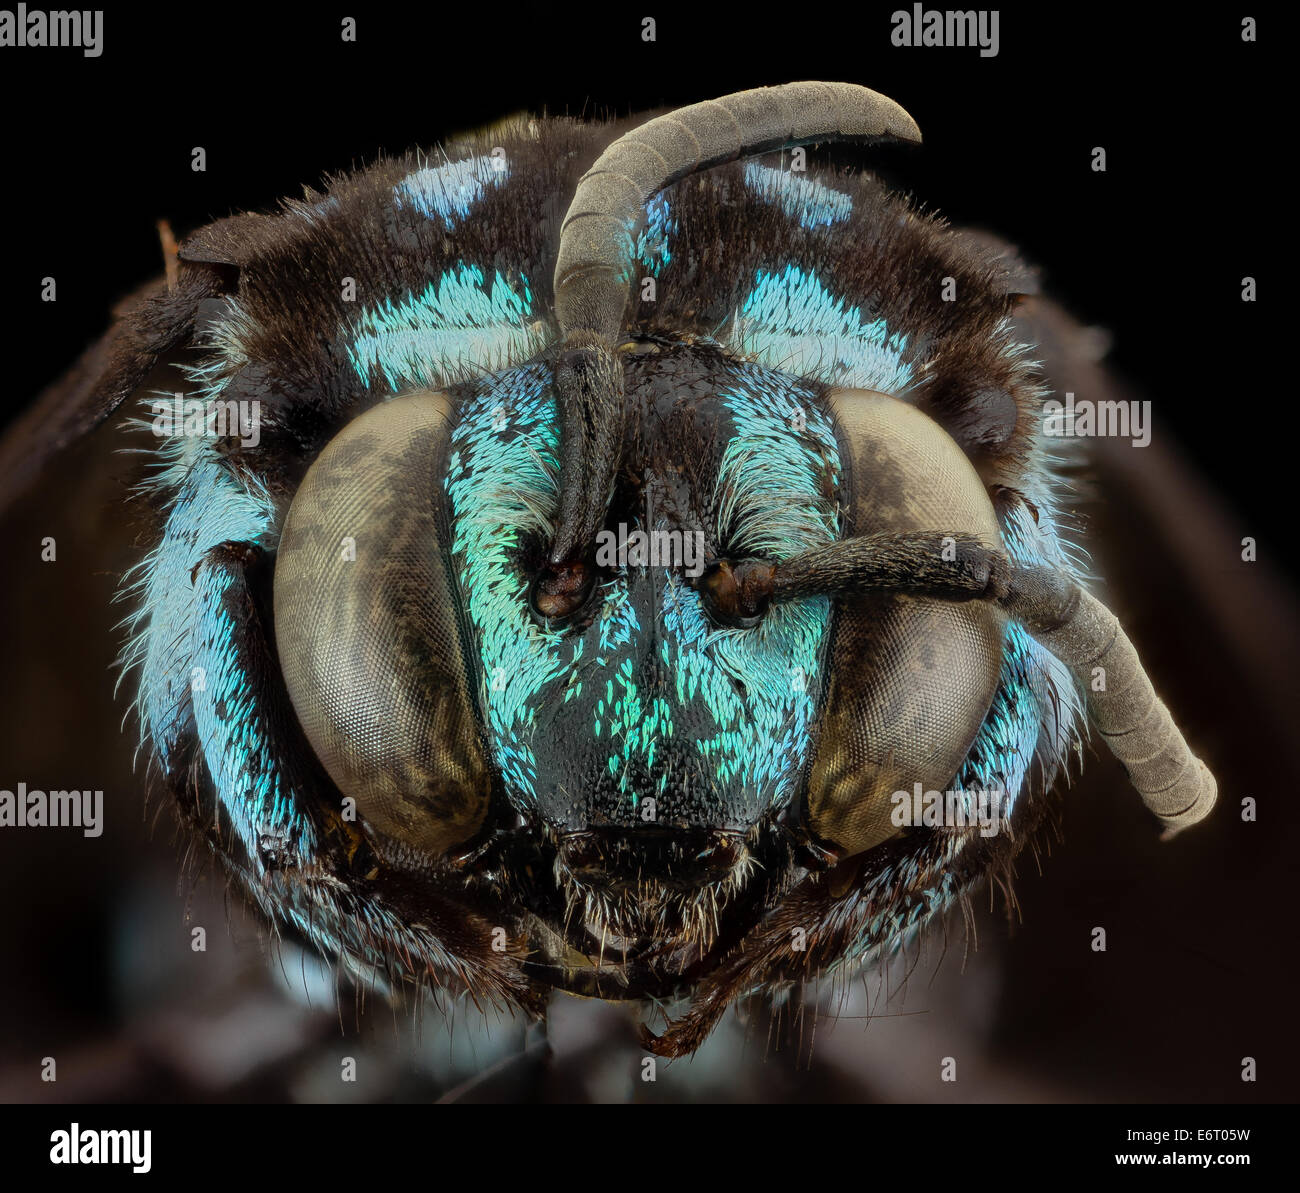 Thyreus wallacei, m, face, philippines, mt banahaw 2014-07-15-184738 ZS PMax 14489485657 o Spectacular in its glittering blue ha Stock Photo